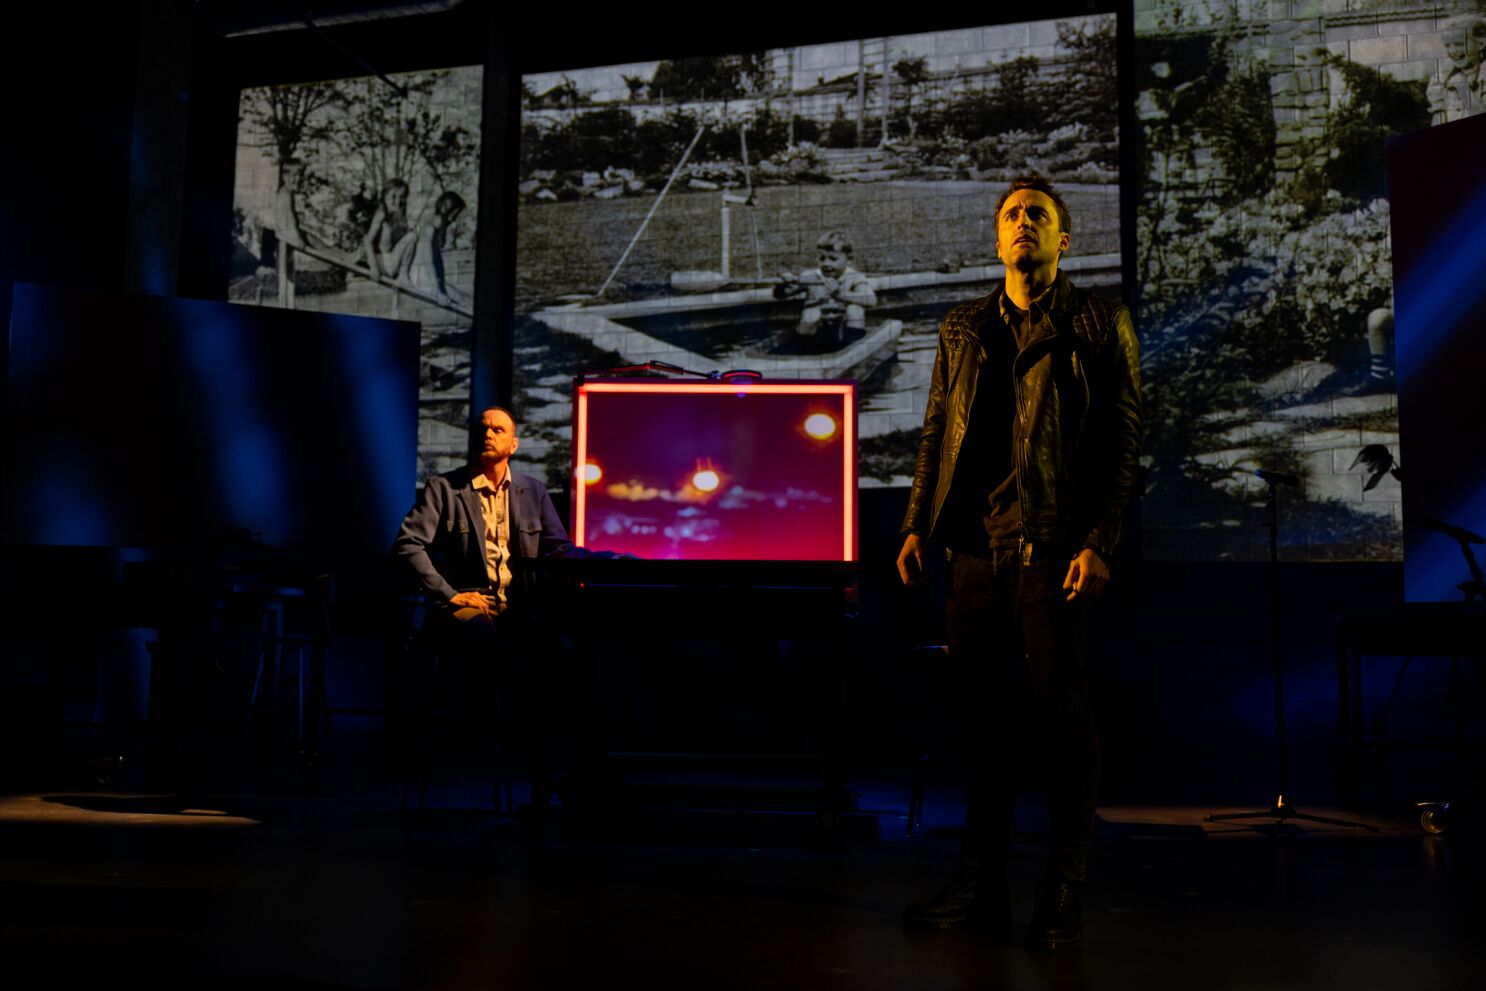 Wereldrecord Guinness Book Verzorger Sporten Review: La Jolla Playhouse's 'Here There Are Blueberries' a chilling  examination of human cruelty - The San Diego Union-Tribune